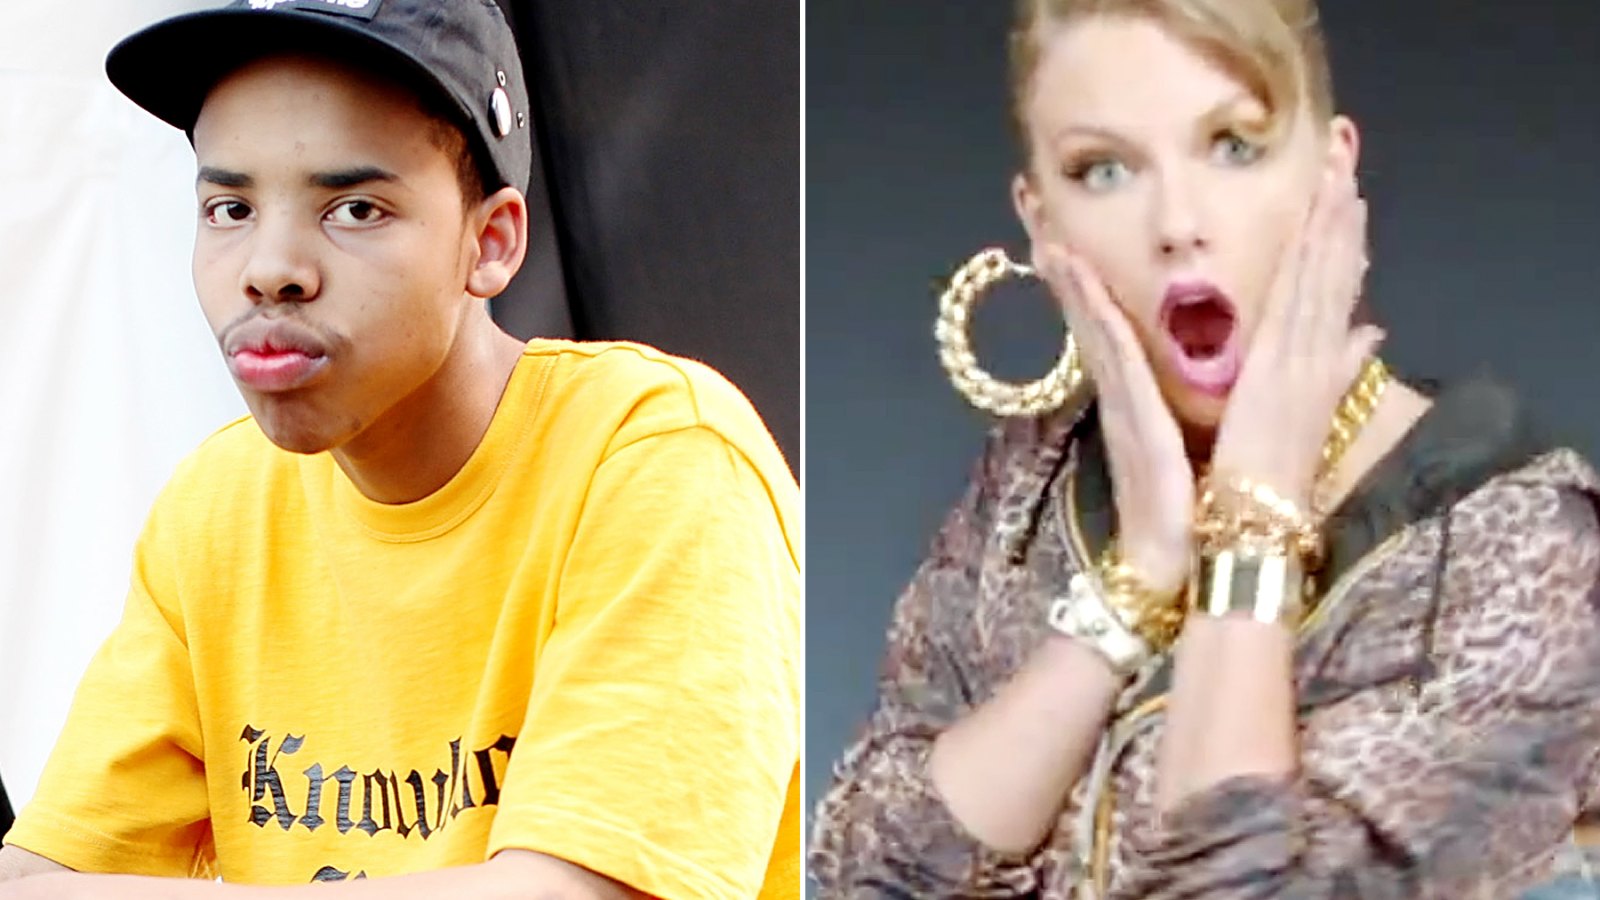 Earl Sweatshirt and Taylor Swift in her new video "Shake It Off"